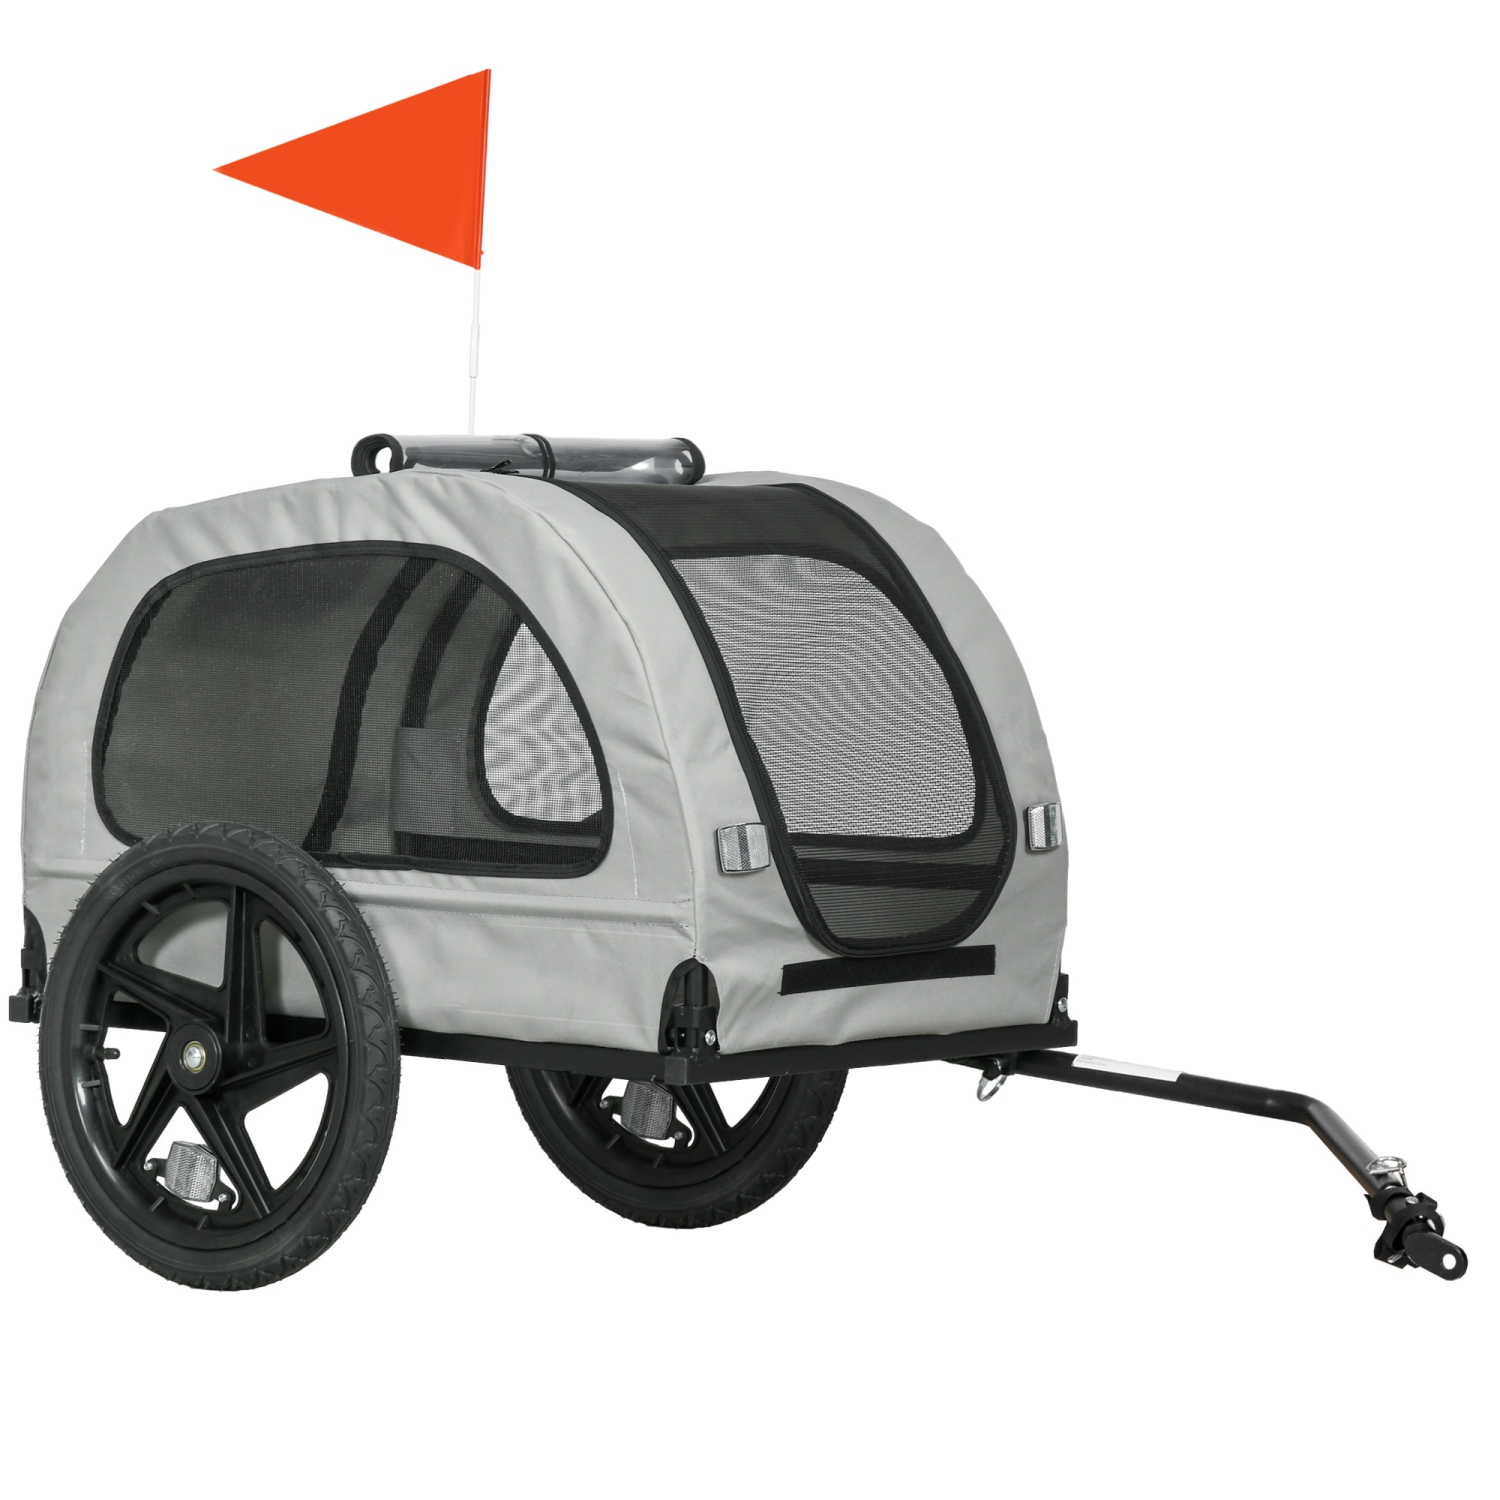 Aosom Dog Bike Trailer, Foldable Dog Wagon with Mesh Windows, Safety Leash, Safety Flag, Front/Rear Doors, Pet Bicycle Trailer for Medium Dogs Travel, Light Grey